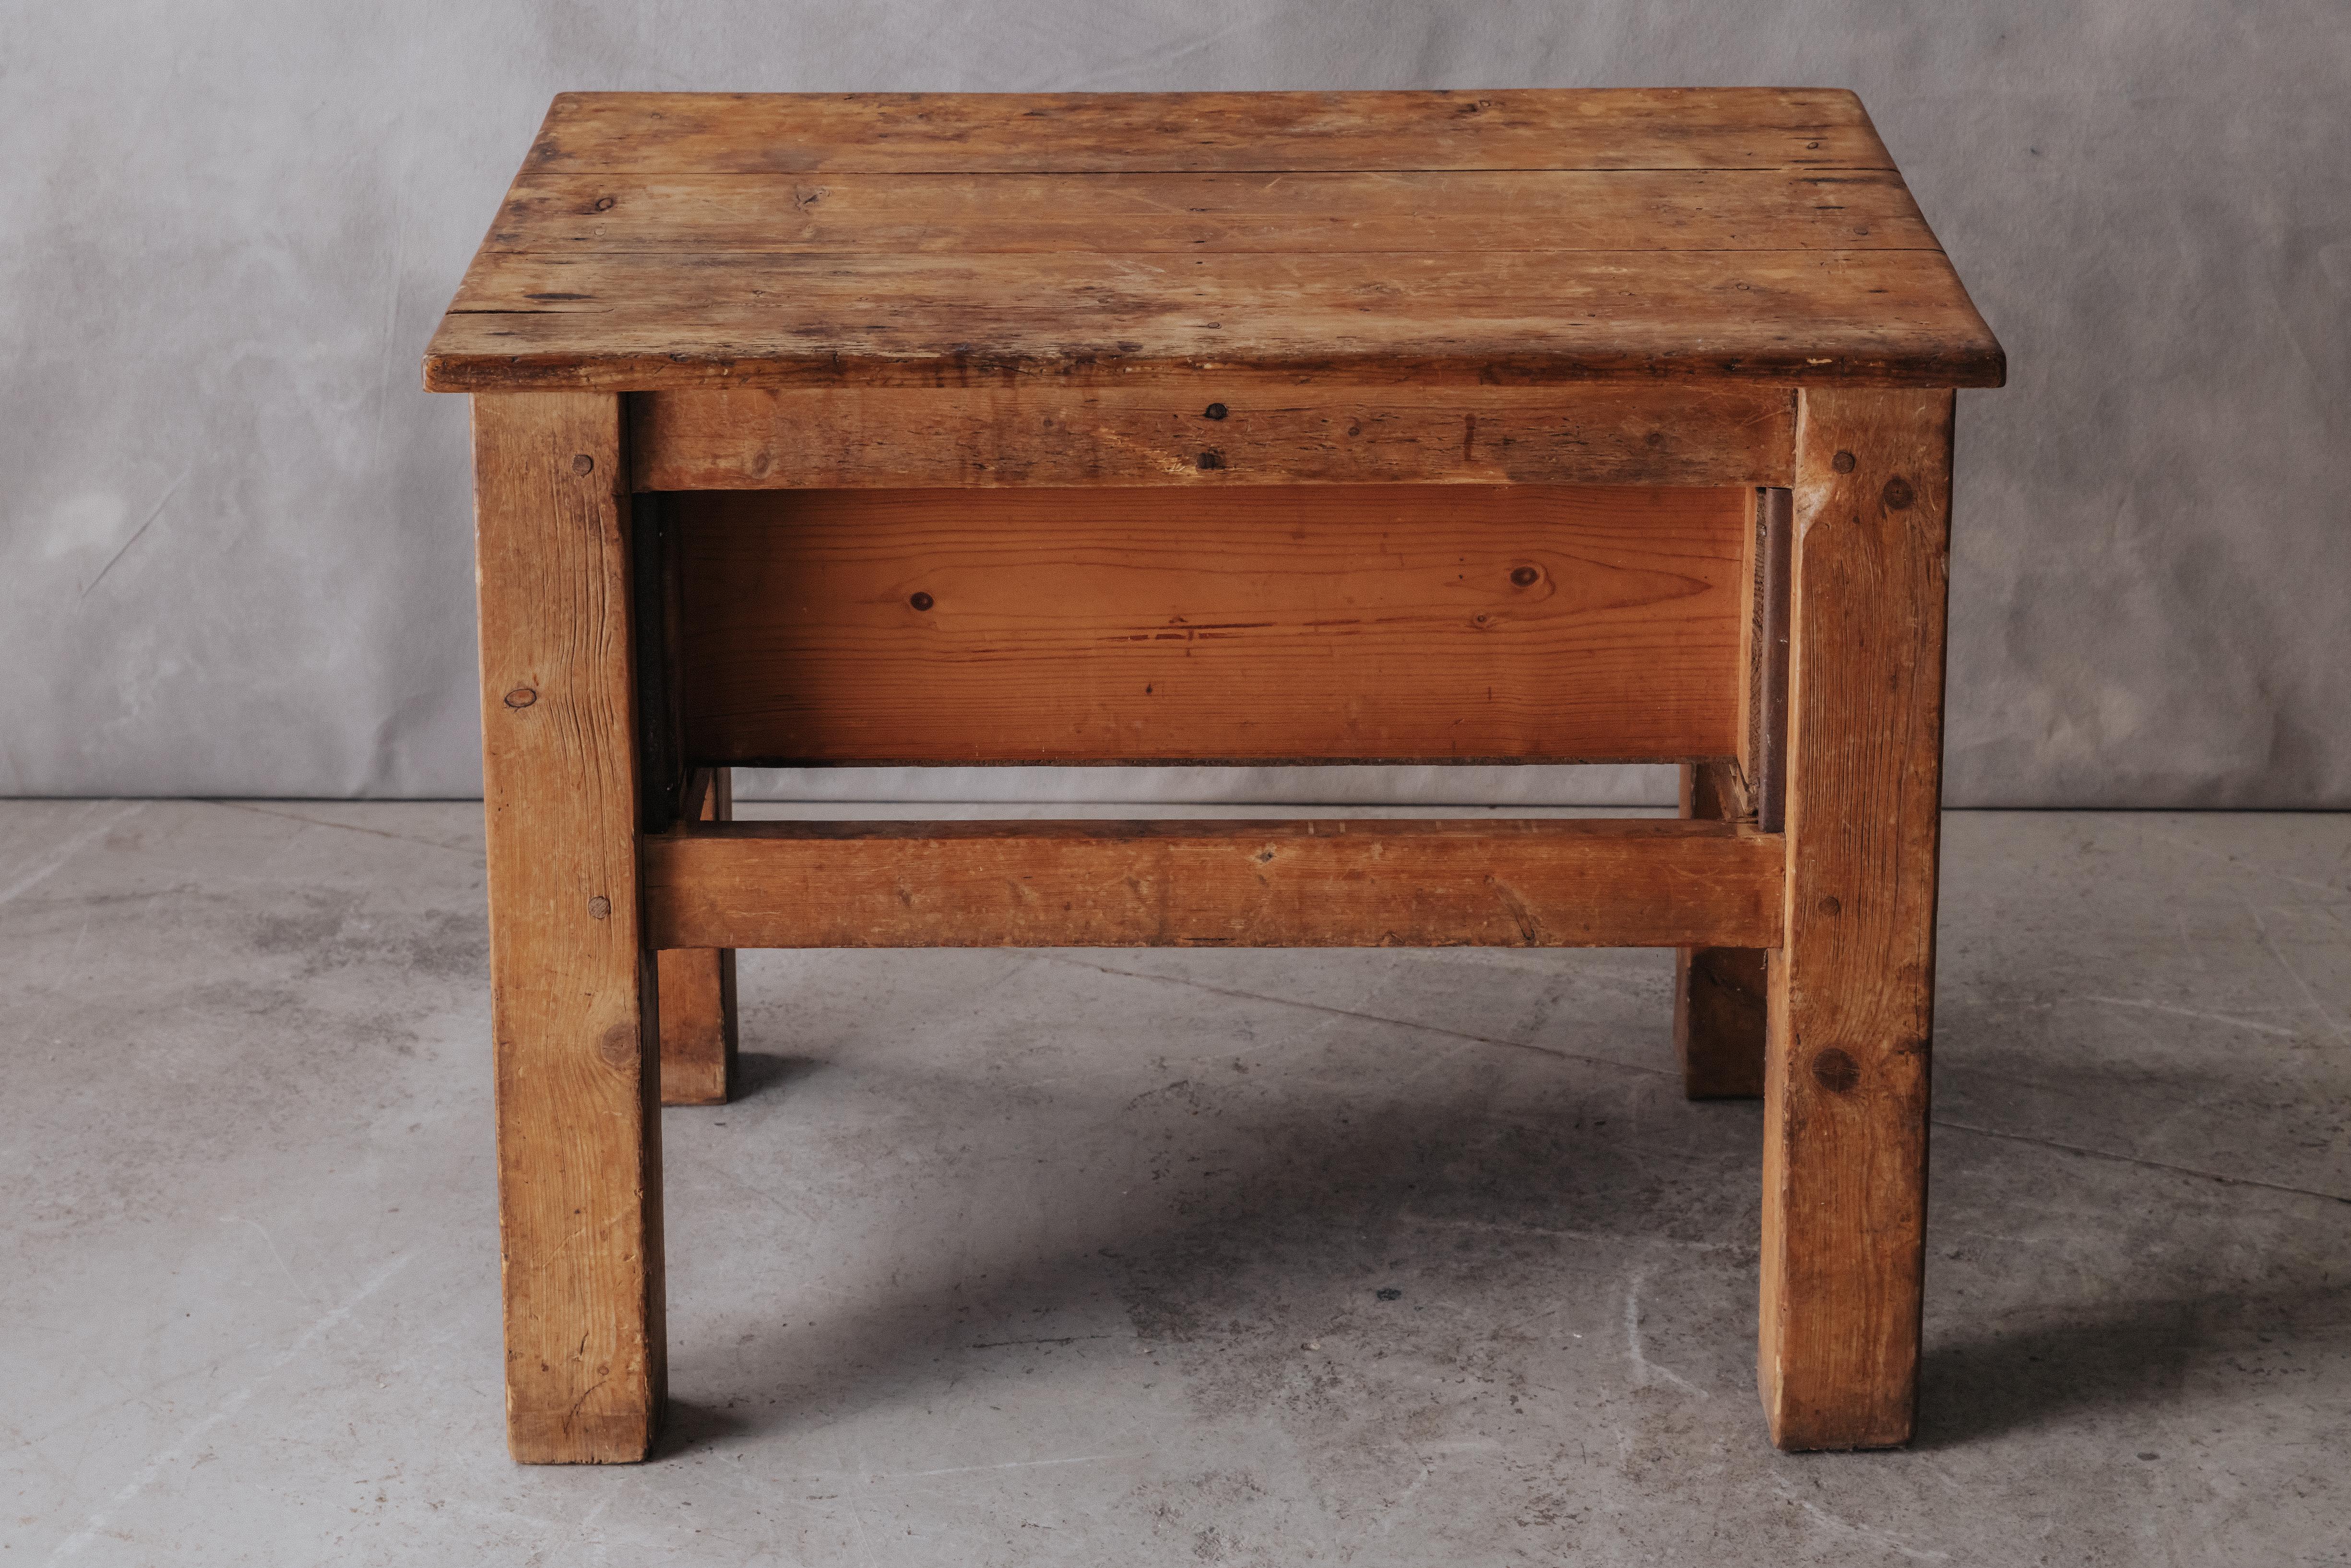 Vintage Kitchen Table from France, Circa 1940.  Solid pine construction with great patina and use.  Original hardware.